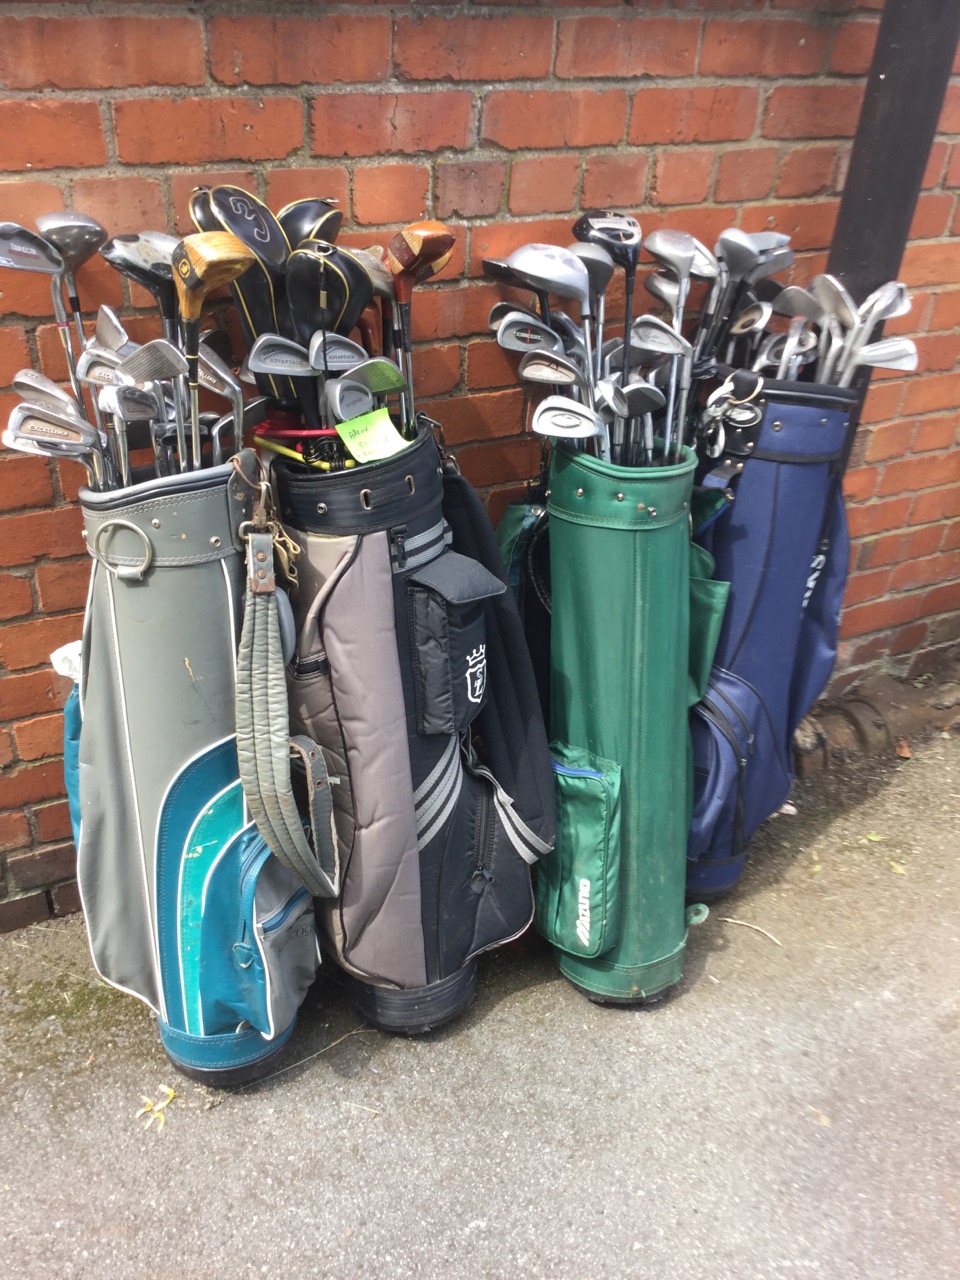 Four golf bags containing approx 80 golf clubs - Spalding, Slazenger, Howson, Fred Smyth, Wilson,